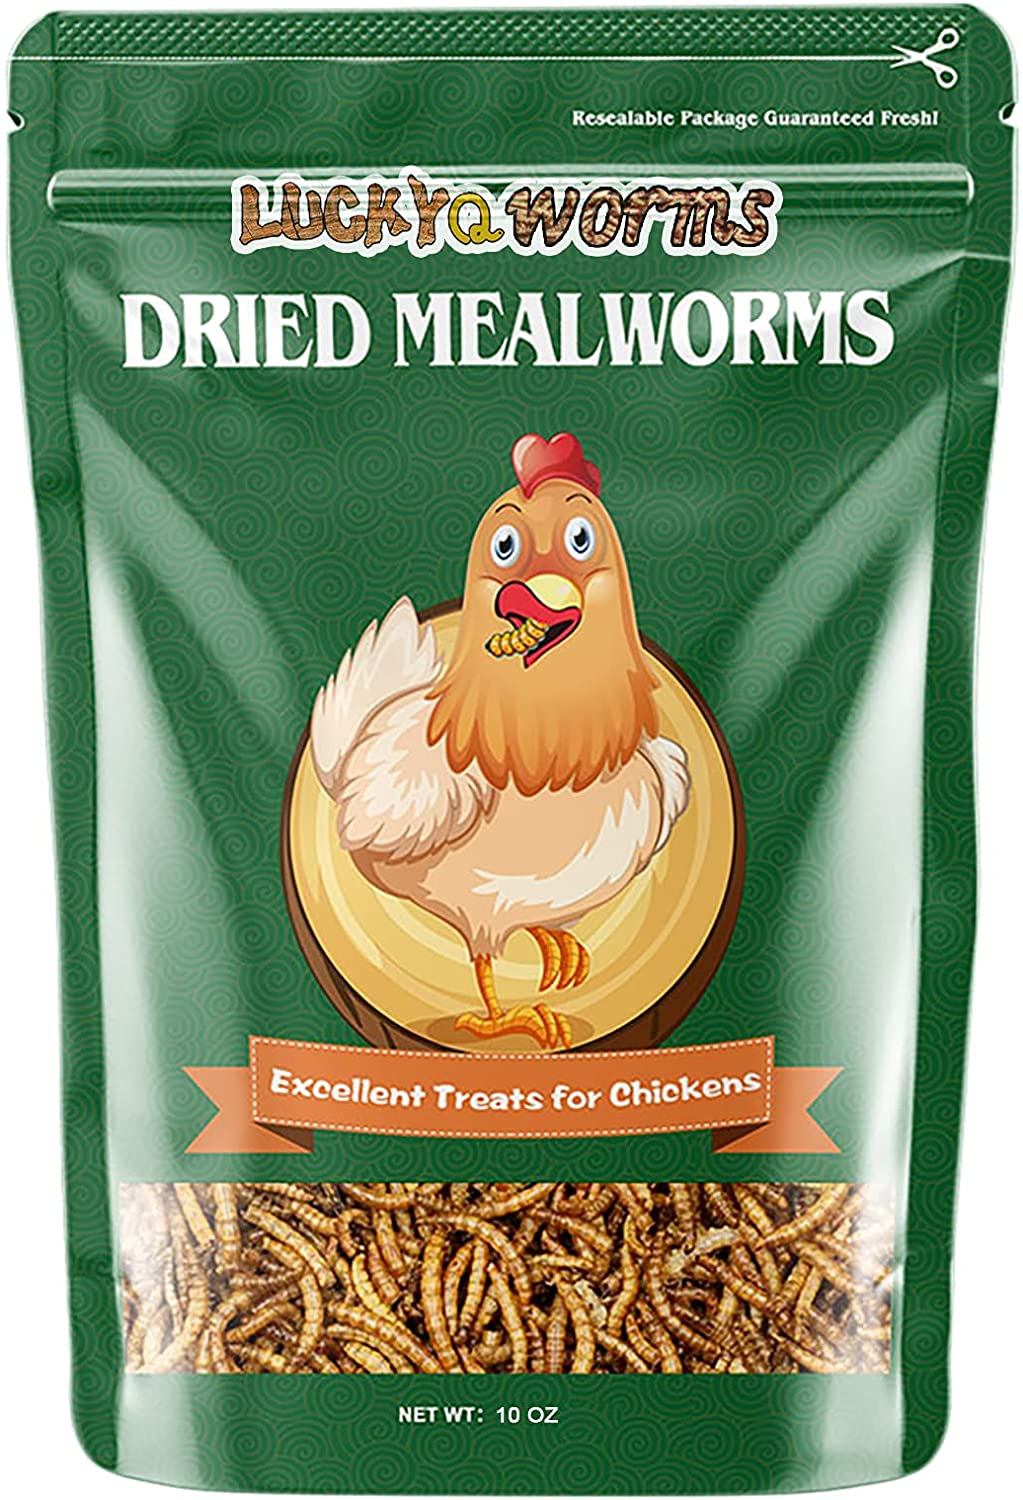 Mealworms, High-Protein Bulk Dried Mealworms 0.6Lbs-44Lbs, 100% Non-Gmo Mealworm Treats for Birds, Chickens, Turtles, Fish, Hamsters and Hedgehogs All Natural Animal Feed